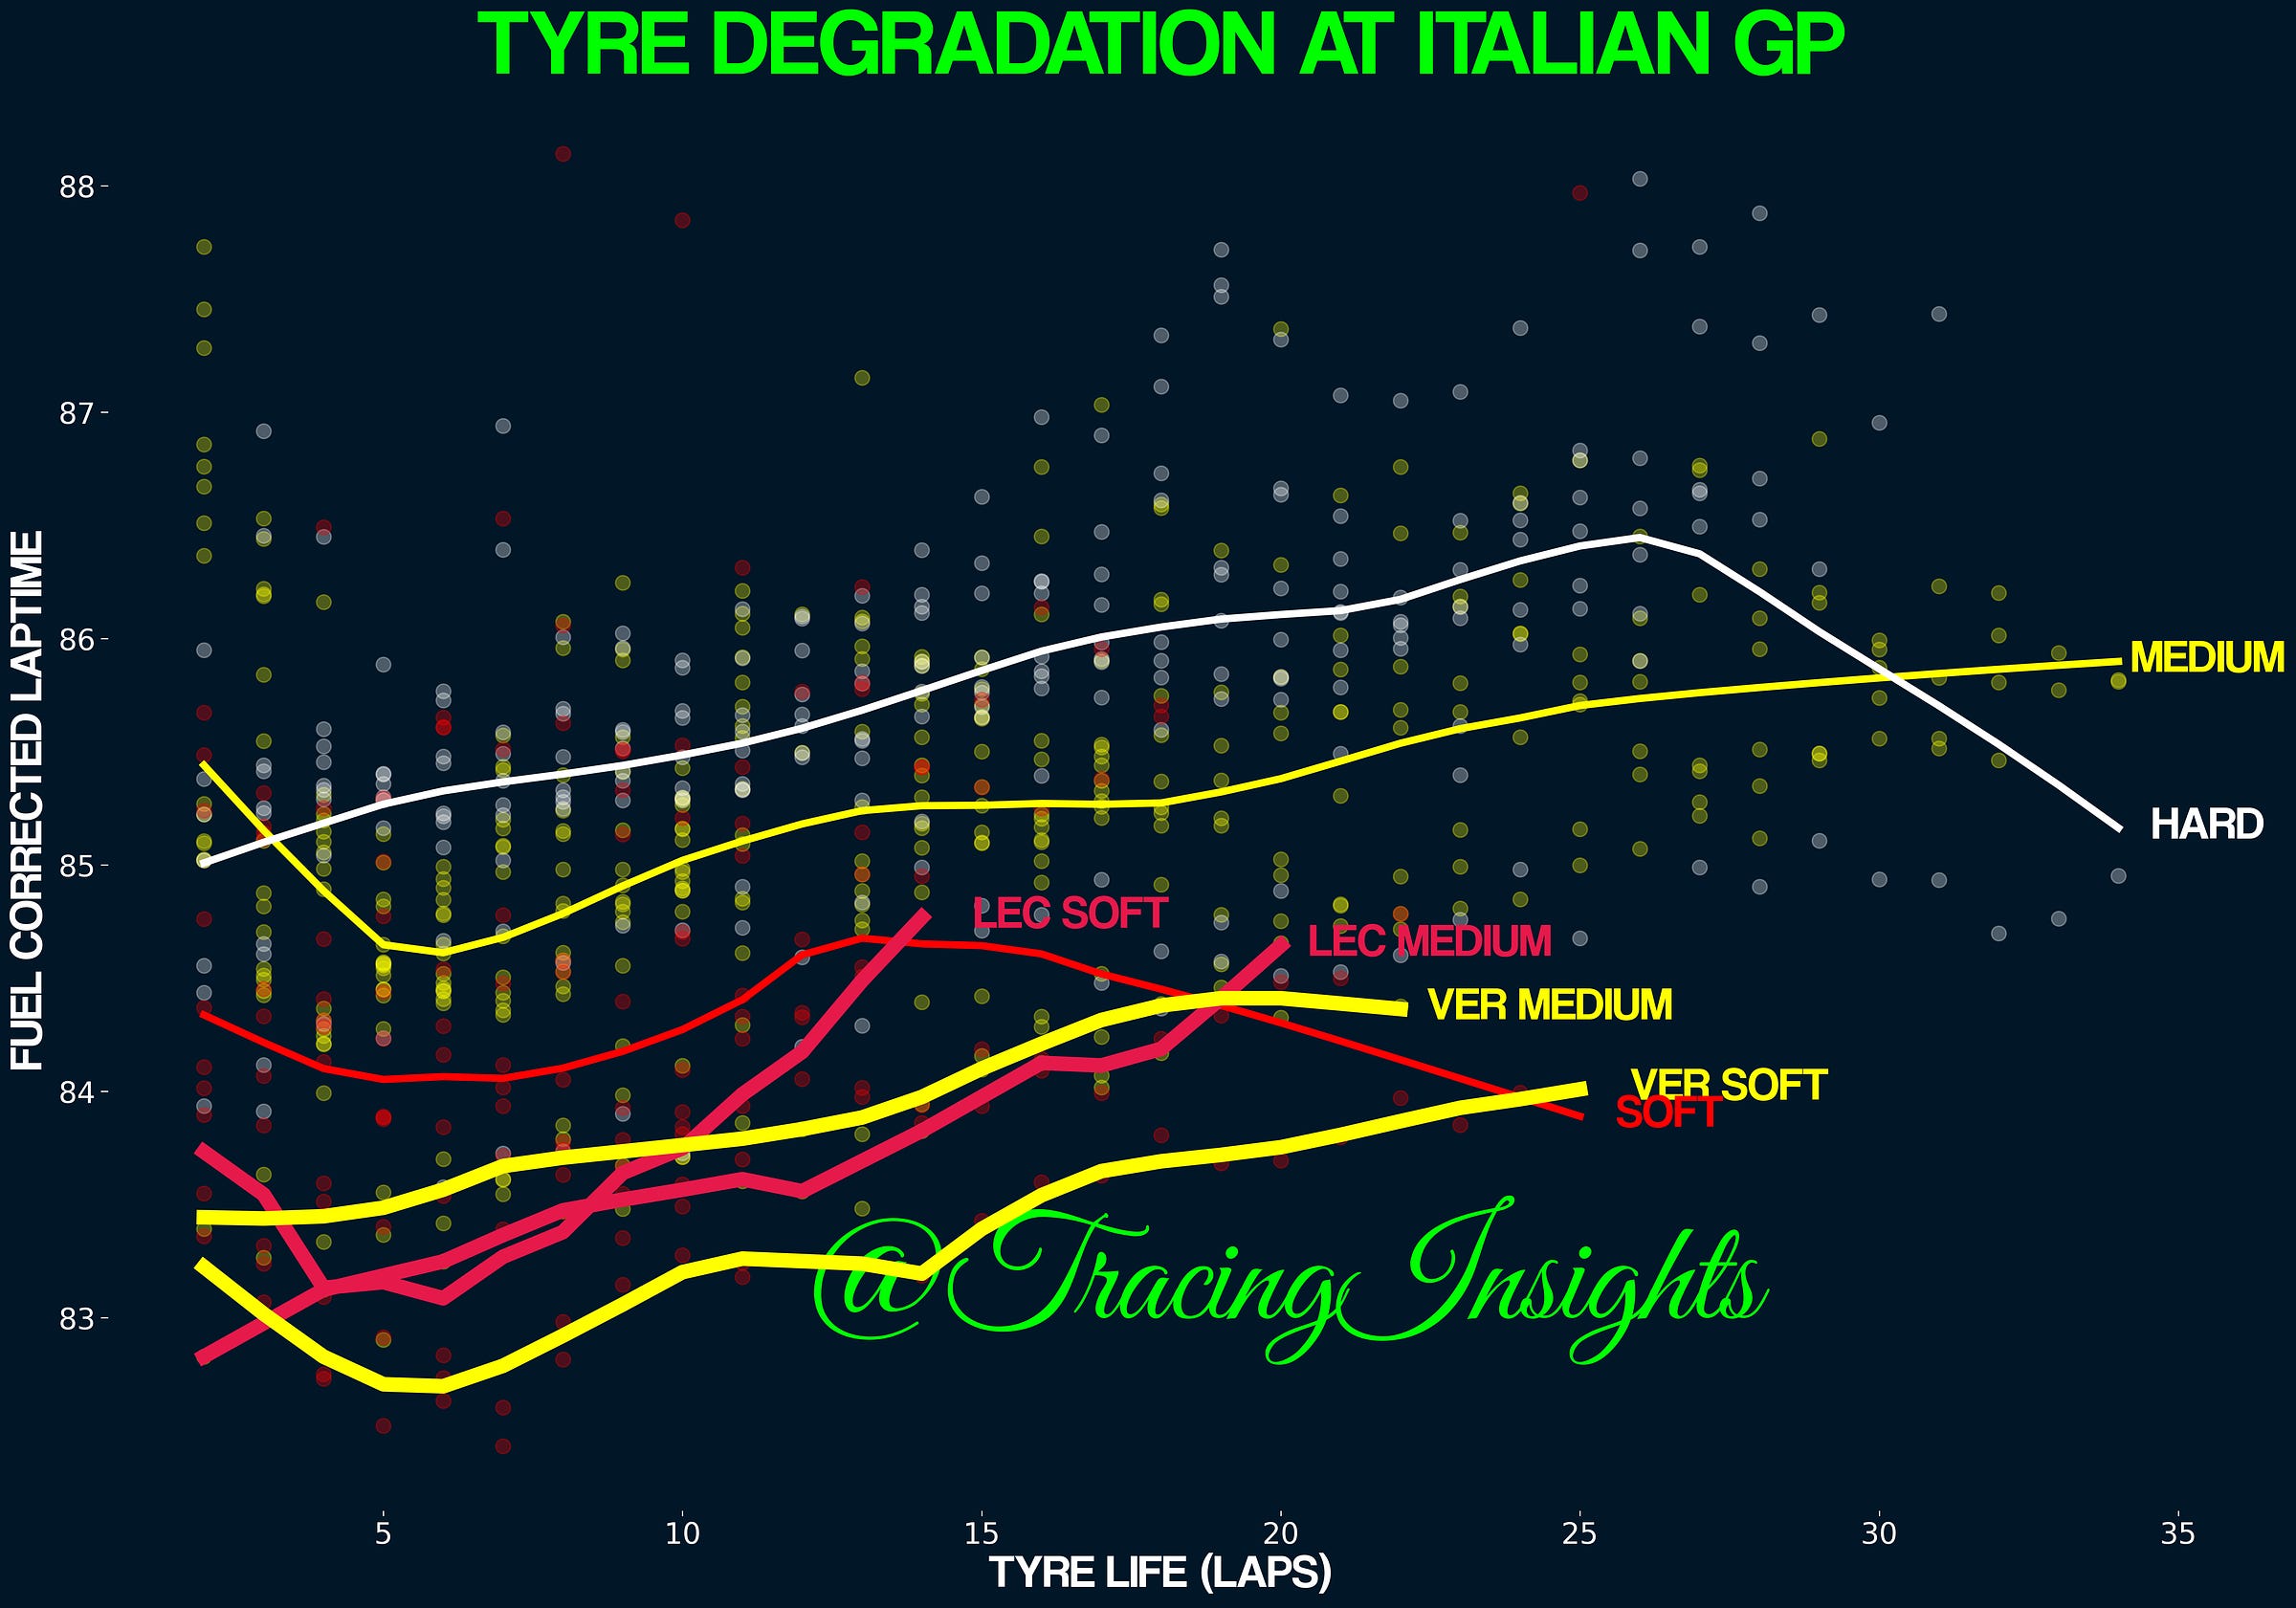 Italian Grand Prix Tyre Degradation Analysis of different compounds. Charles Leclerc lap times and Max Verstappen race pace compared